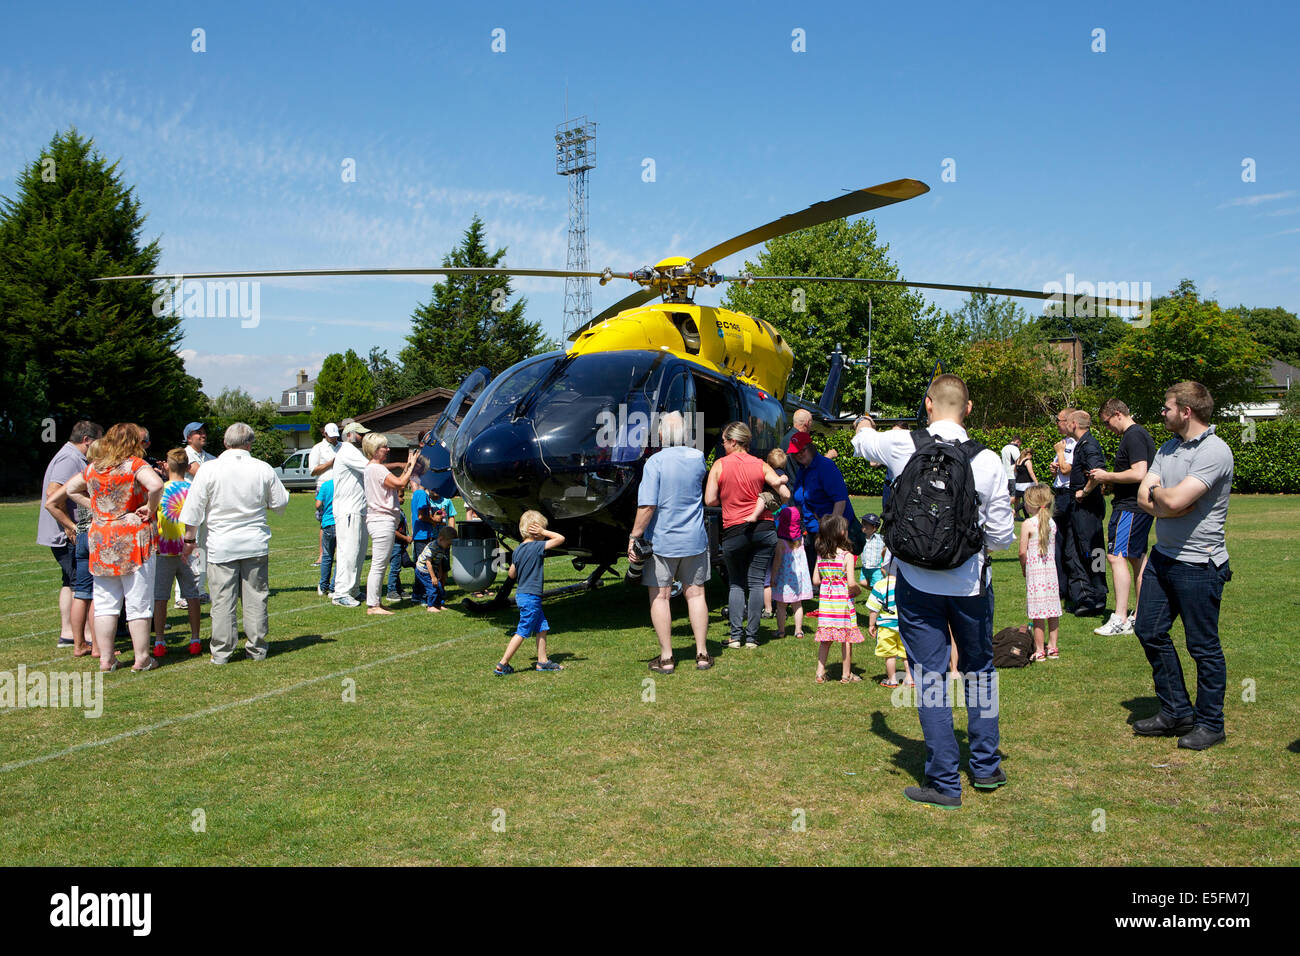 Imber Court police sports club, Ember Road, East Molesey, Surrey, UK. 29th July, 2014.  the Metropolitan Police helicopter (twin engine EC145 Eurocopter) lands as part of the entertainment for visitors to the Howorth Trophy day. This is a cricket match played by teams from different Metropolitan police departments and stations in commemoration of the death of Ken Howorth (GM - George Medal).  Ken was a bomb disposal officer killed whilst diffusing an IRA bomb in central London in 1981. Credit:  Emma Durnford/Alamy Live News Stock Photo